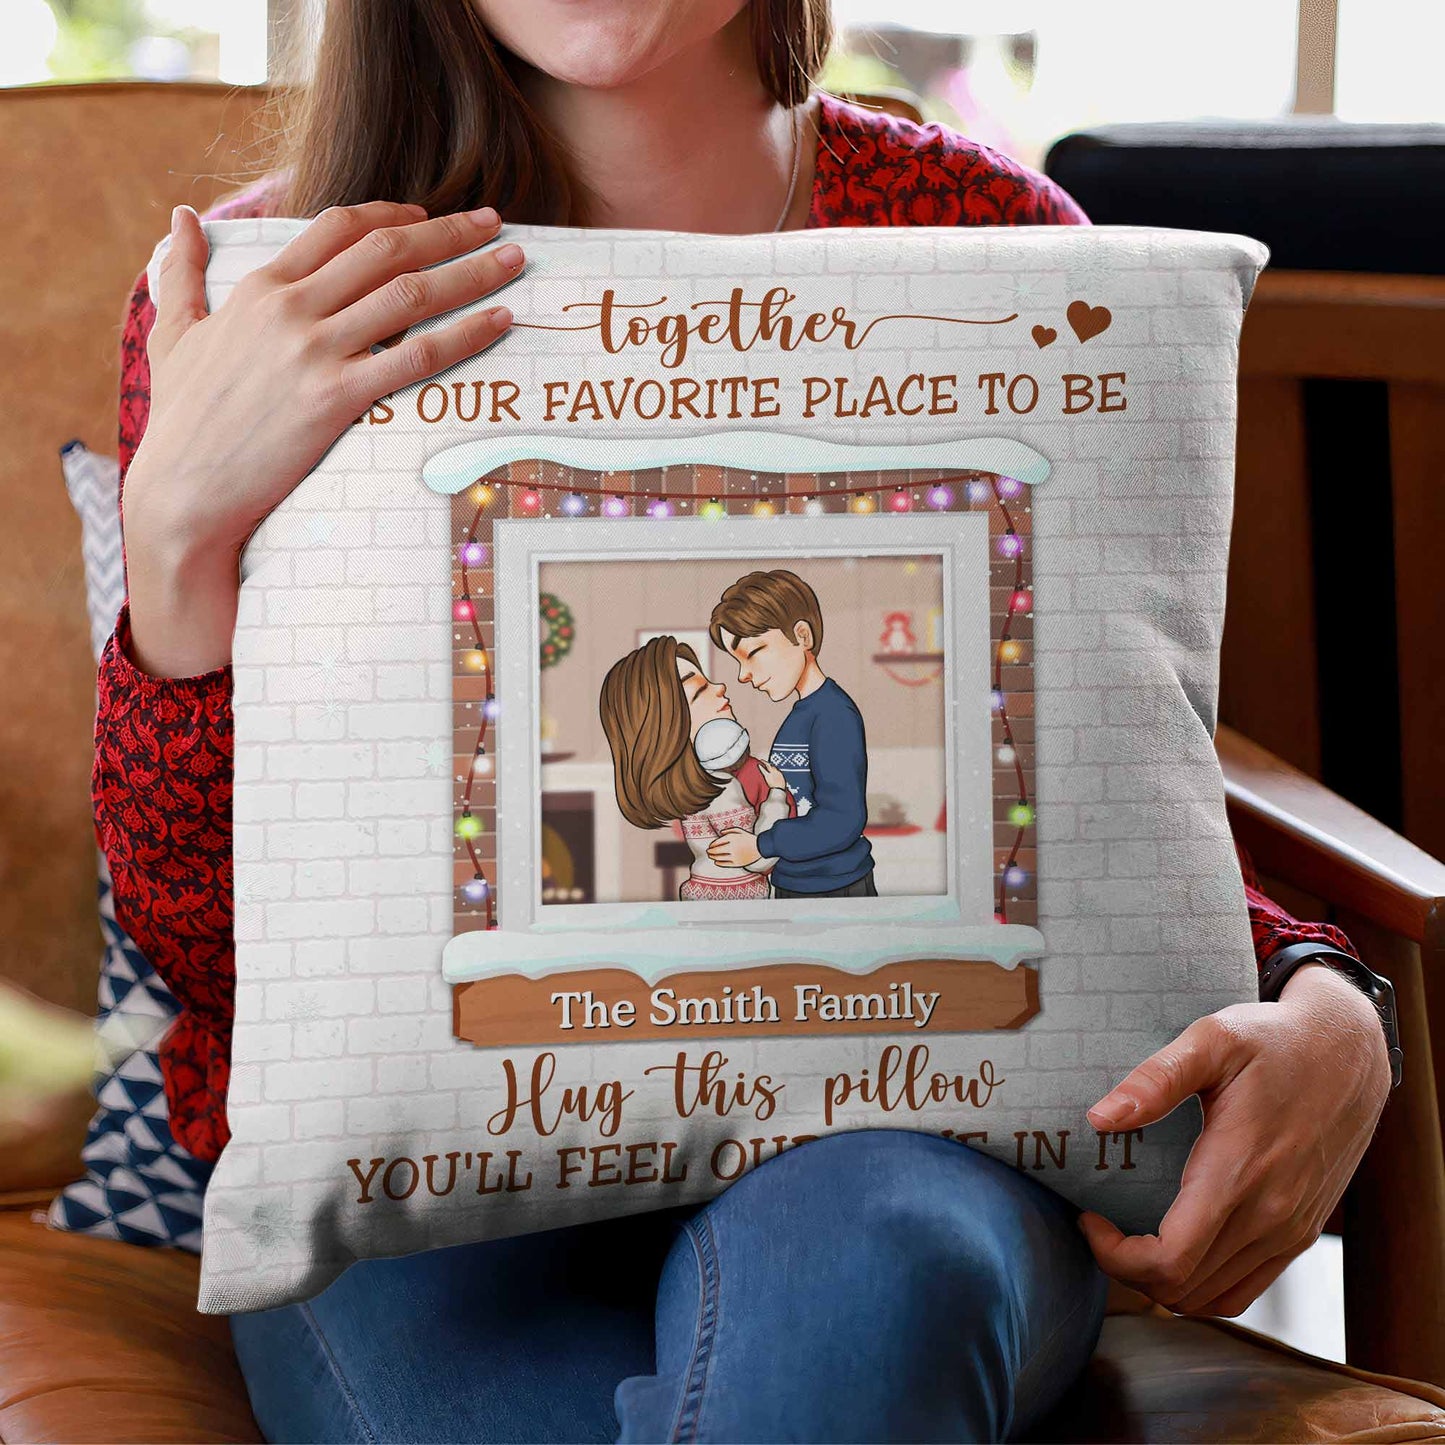 Our Love Our Home - Personalized Pillow - Christmas Gift For Husband, Wife, Anniversary, Newly Wed, Newborn Baby